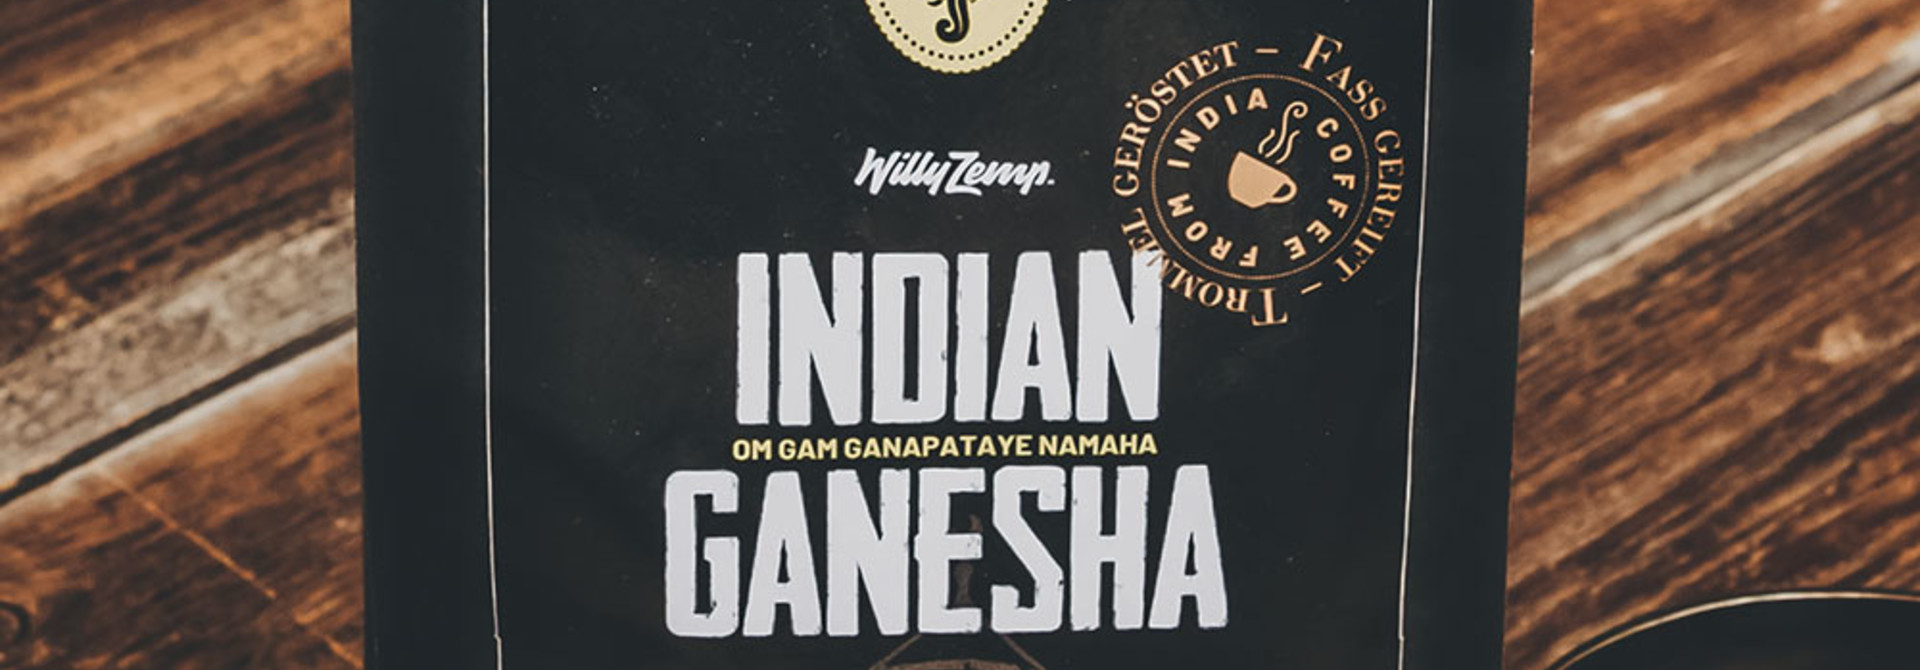 Indian Ganesha - Ristretto Indien